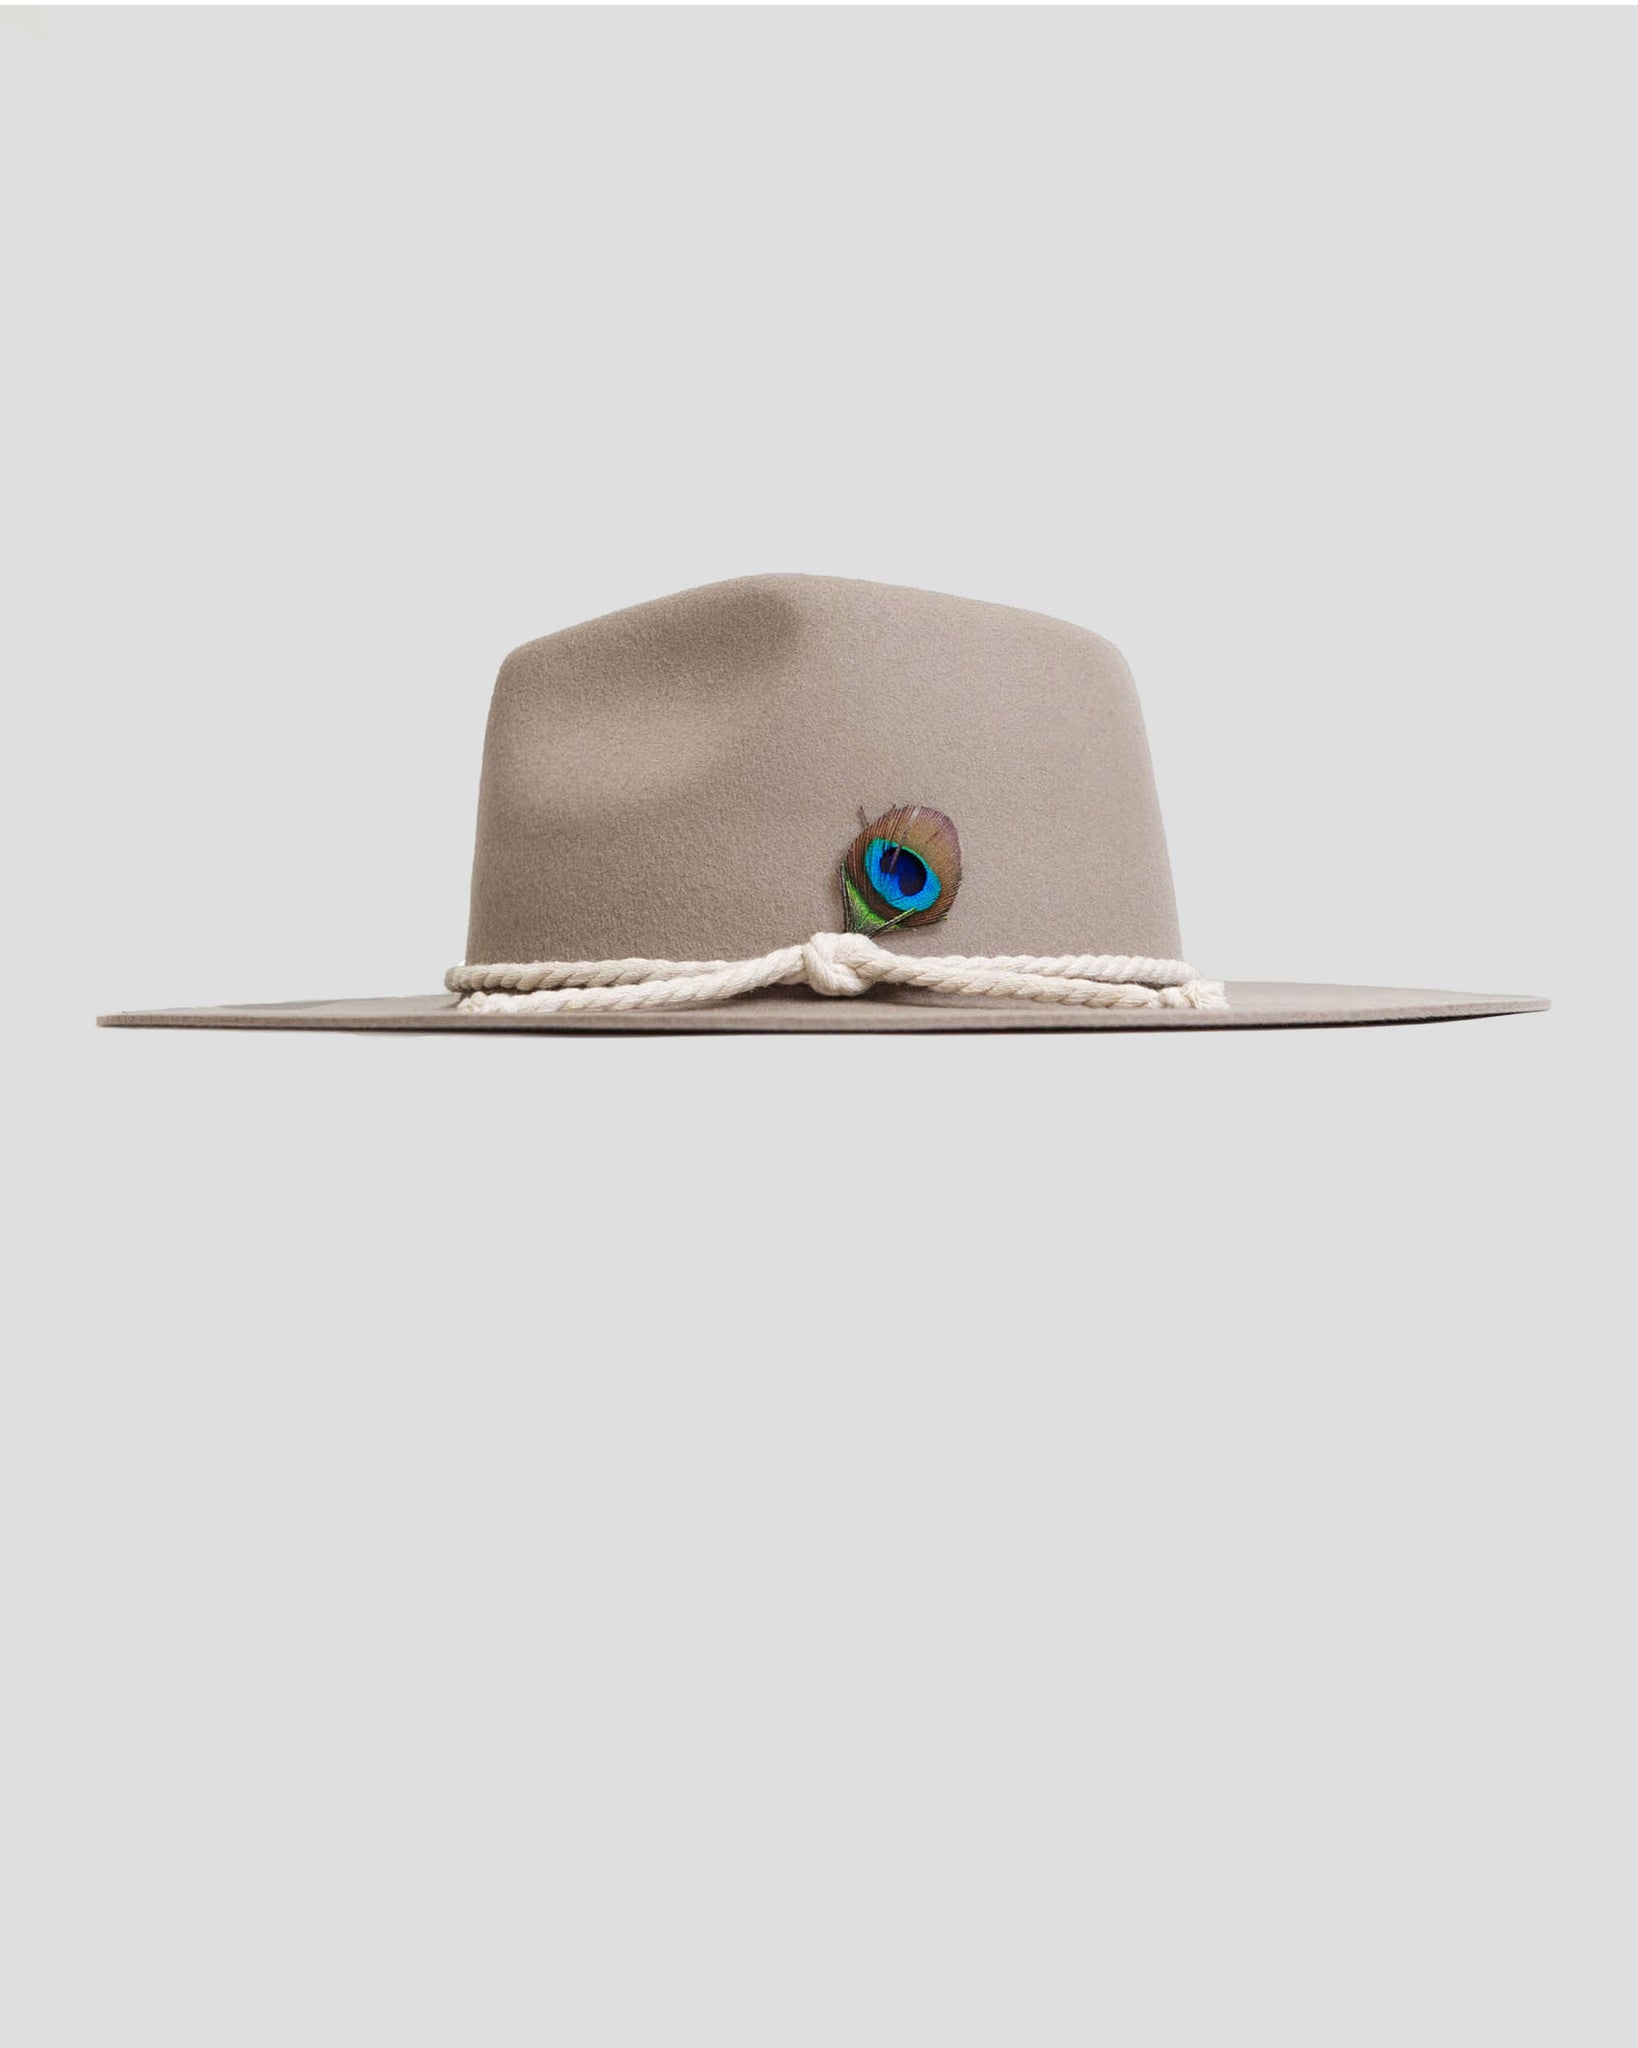 Hats - Wide Brim – Southern Gents